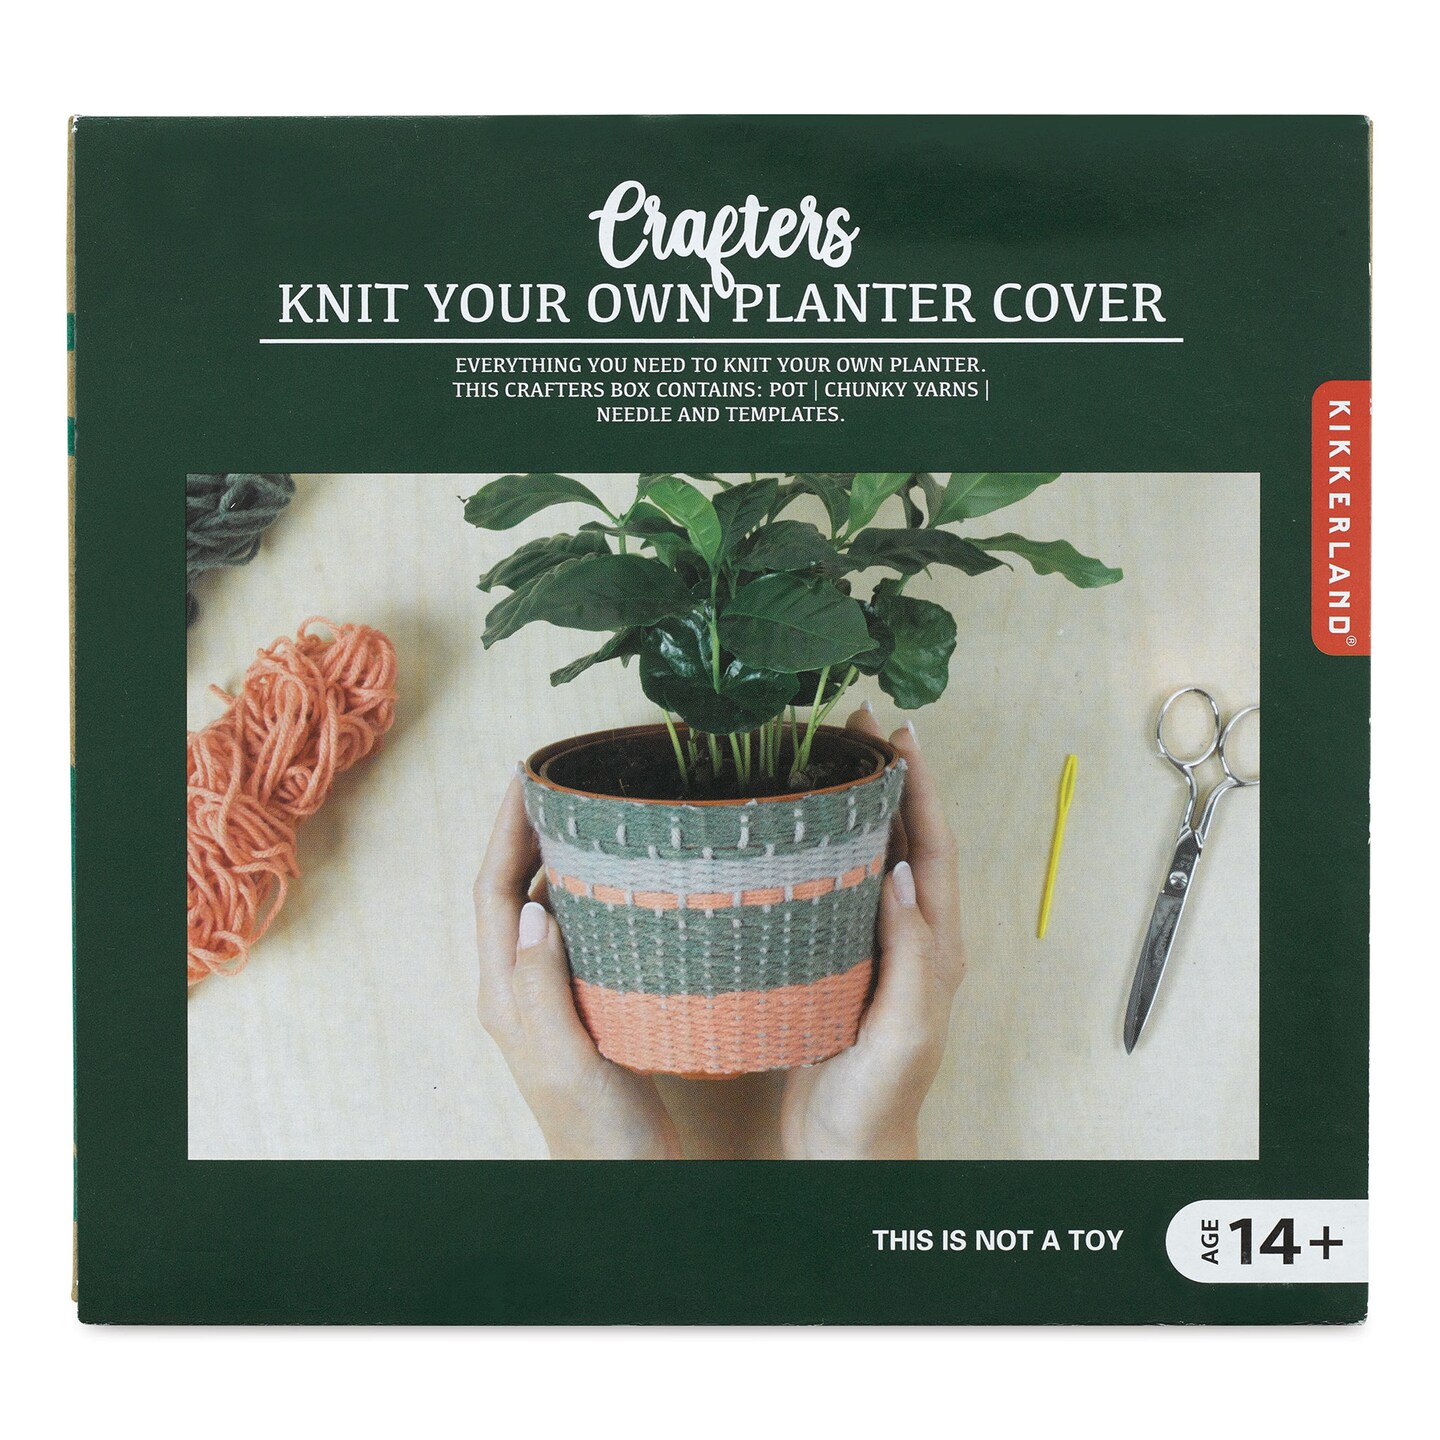 Kikkerland Crafters Knit Your Own Planter Cover Kit